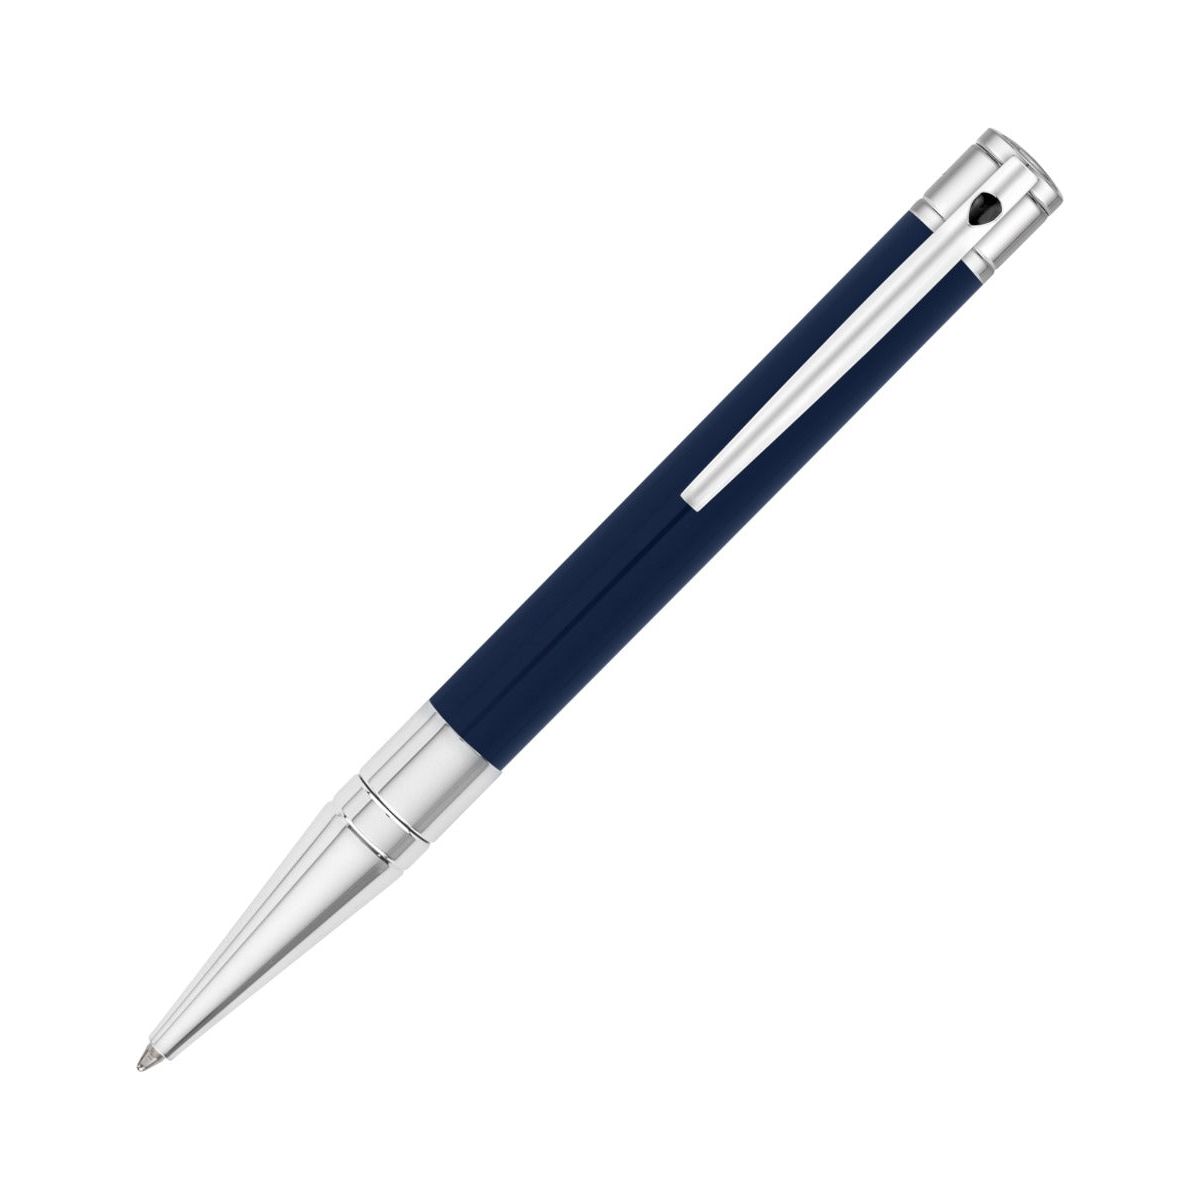 DUPONT WRITING PENNE S-T- DUPONT MOD. 265205 FASHION ACCESSORIES penne-s-t-dupont-mod-265205 265205.jpg